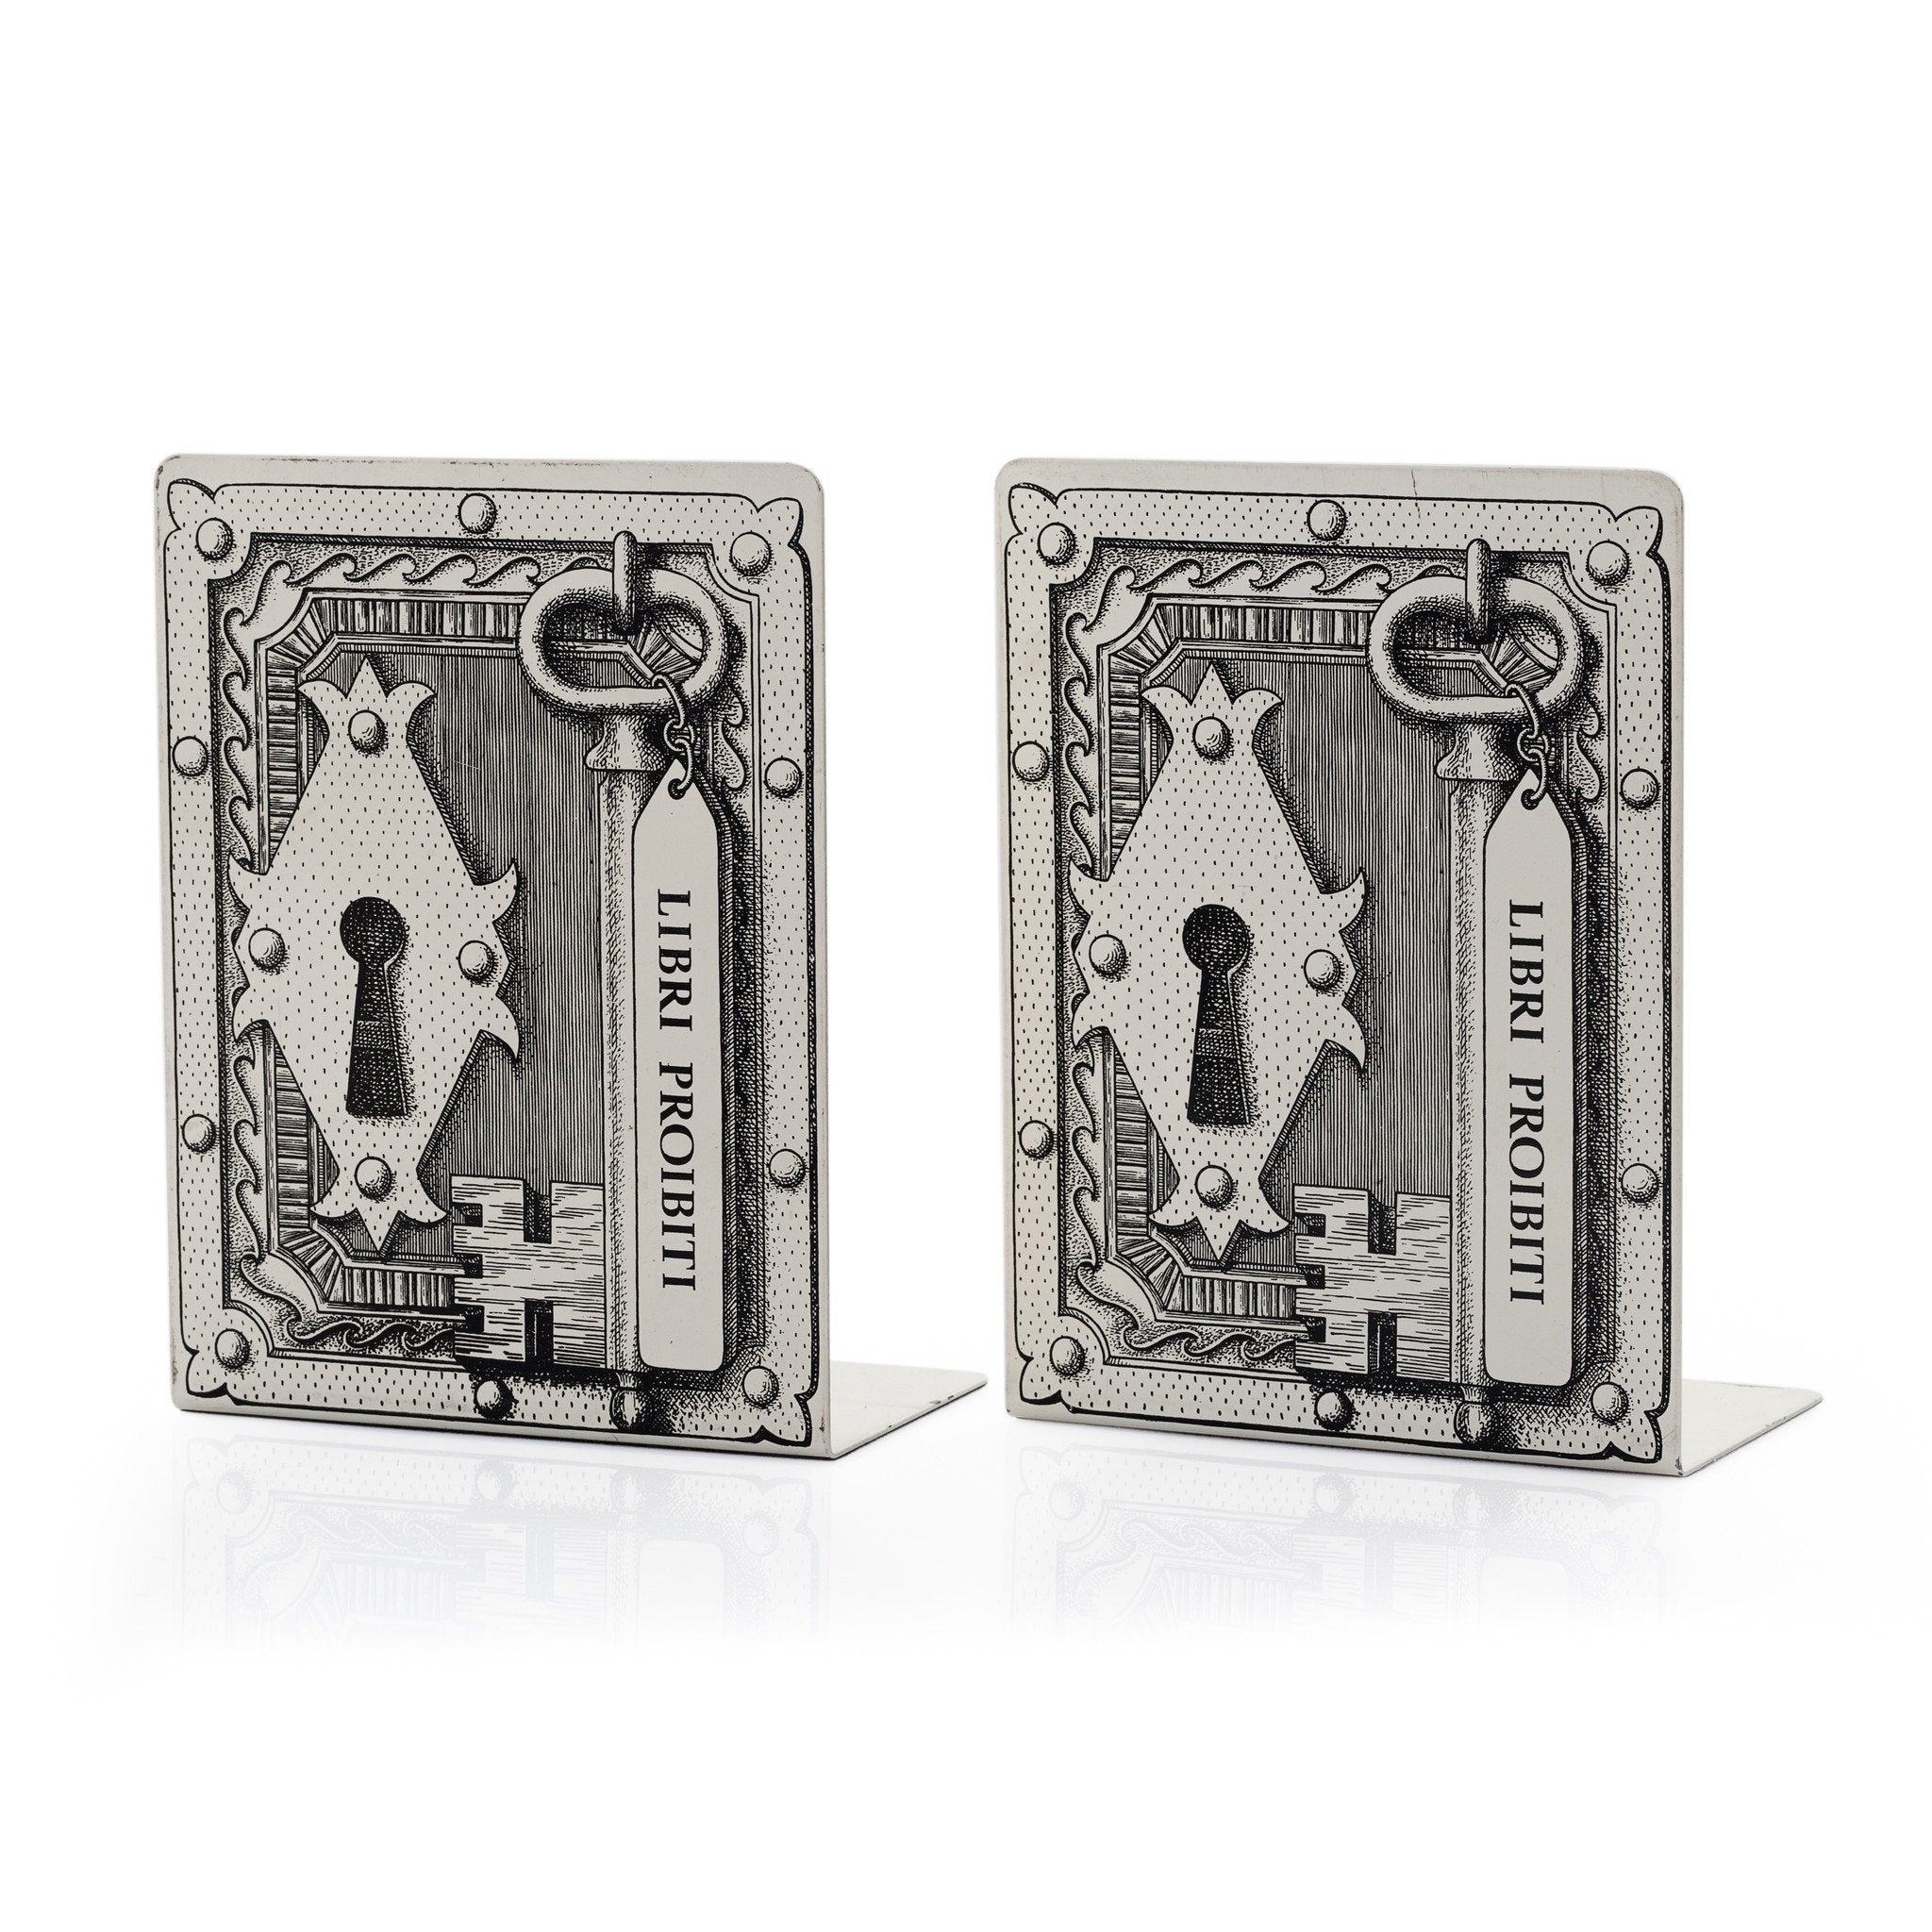 Piero Fornasetti, a Pair of "Banned Books" Bookends, 1950s - ONEROOM